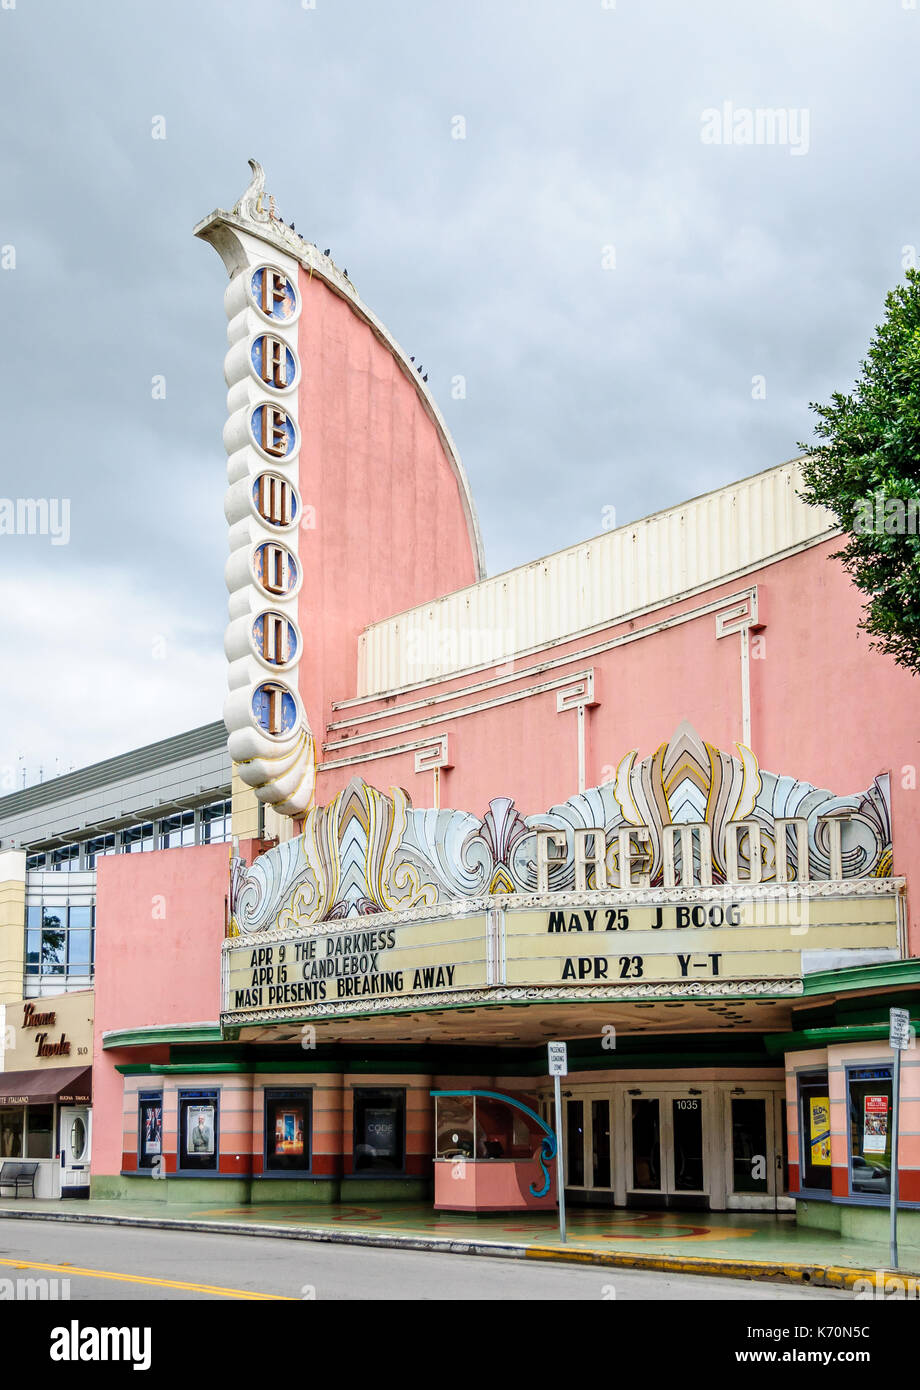 Fremont Theater in San Luis Obispo, a pink art deco landmark in California, among the last Streamline Moderne theaters by architect S. Charles Lee. Stock Photo